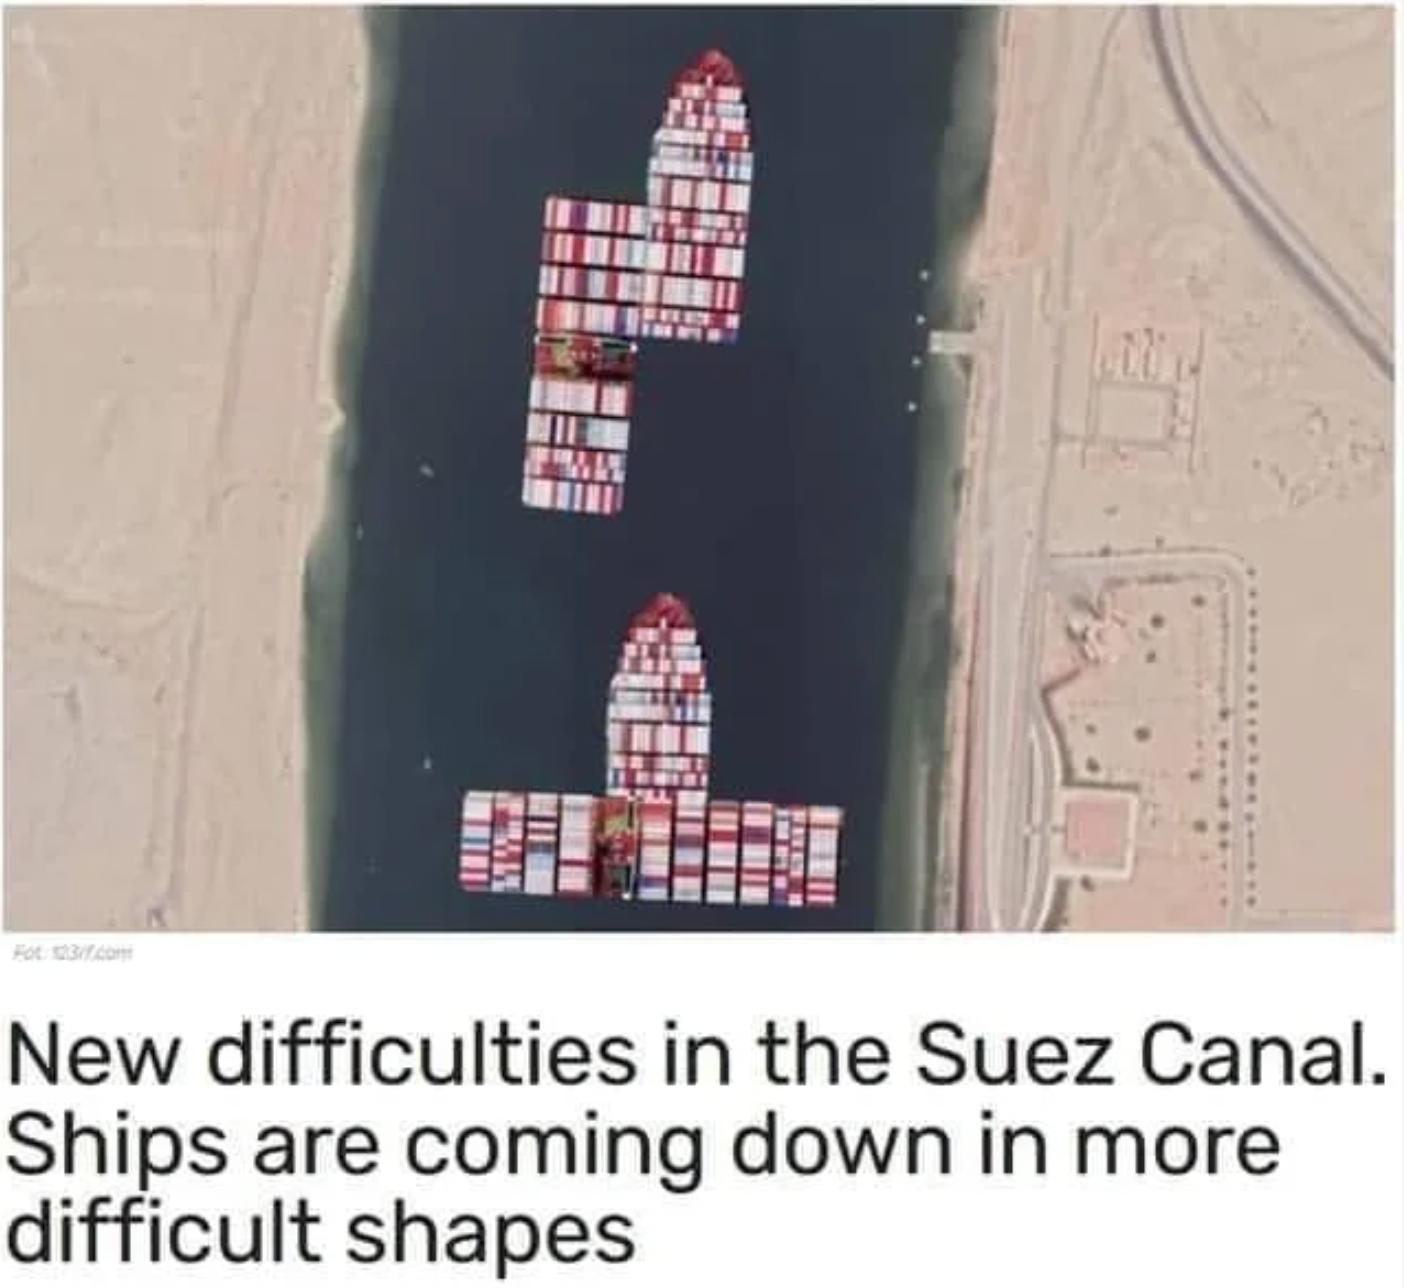 funny gaming memes - Suez Canal - Wive New difficulties in the Suez Canal. Ships are coming down in more difficult shapes